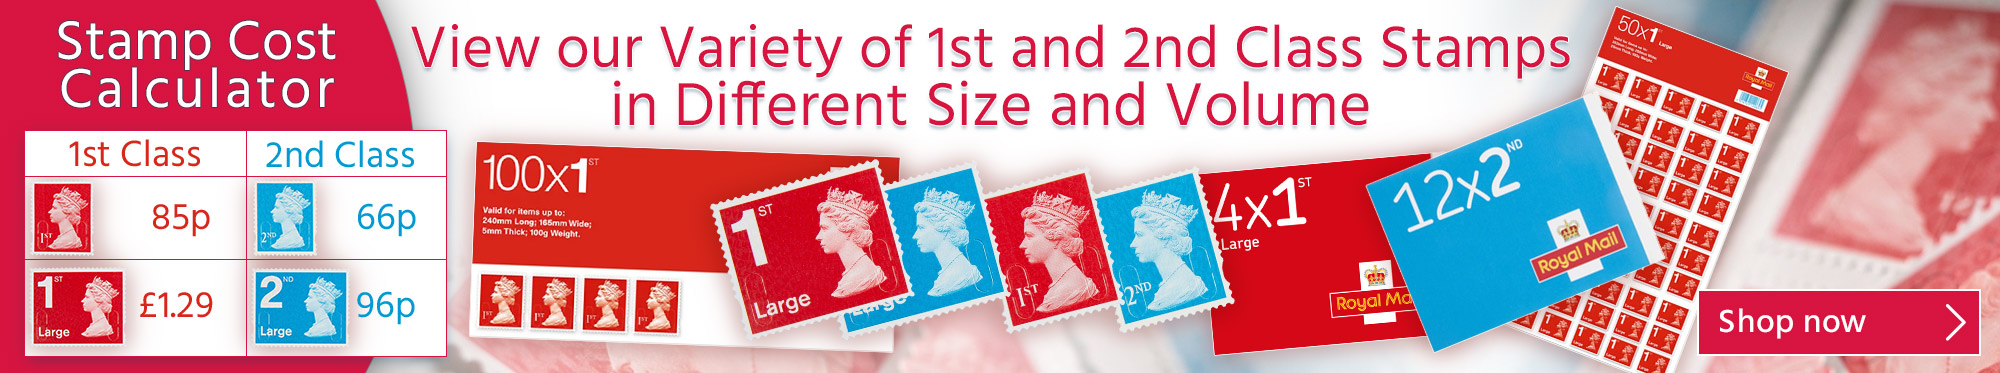 View our Variety of 1st and 2nd Class Stamps